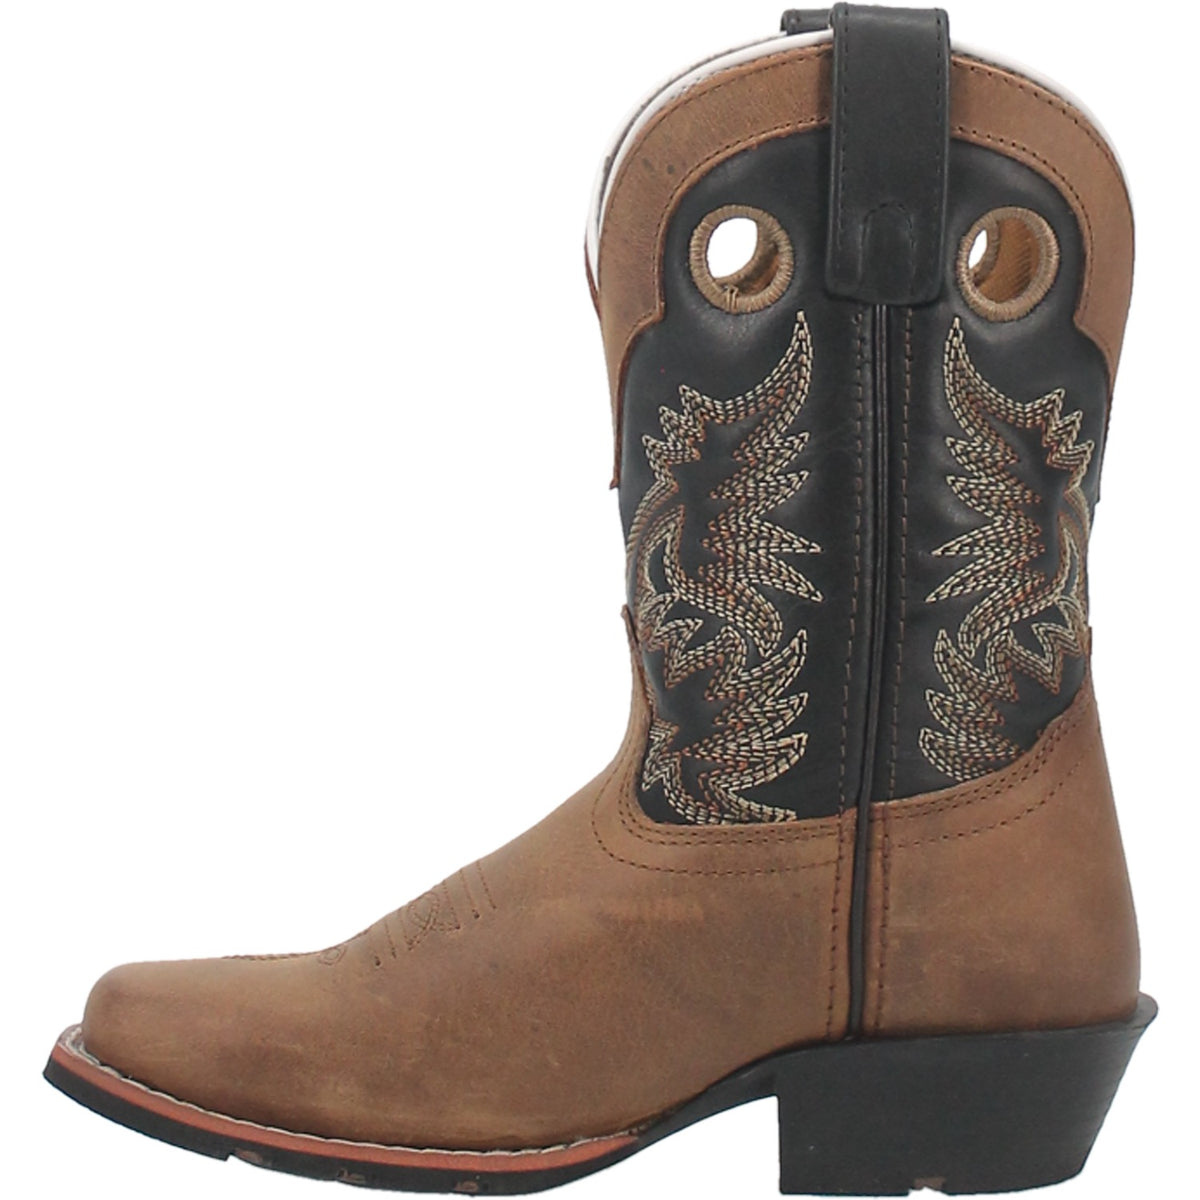 RASCAL LEATHER CHILDREN'S BOOT Cover